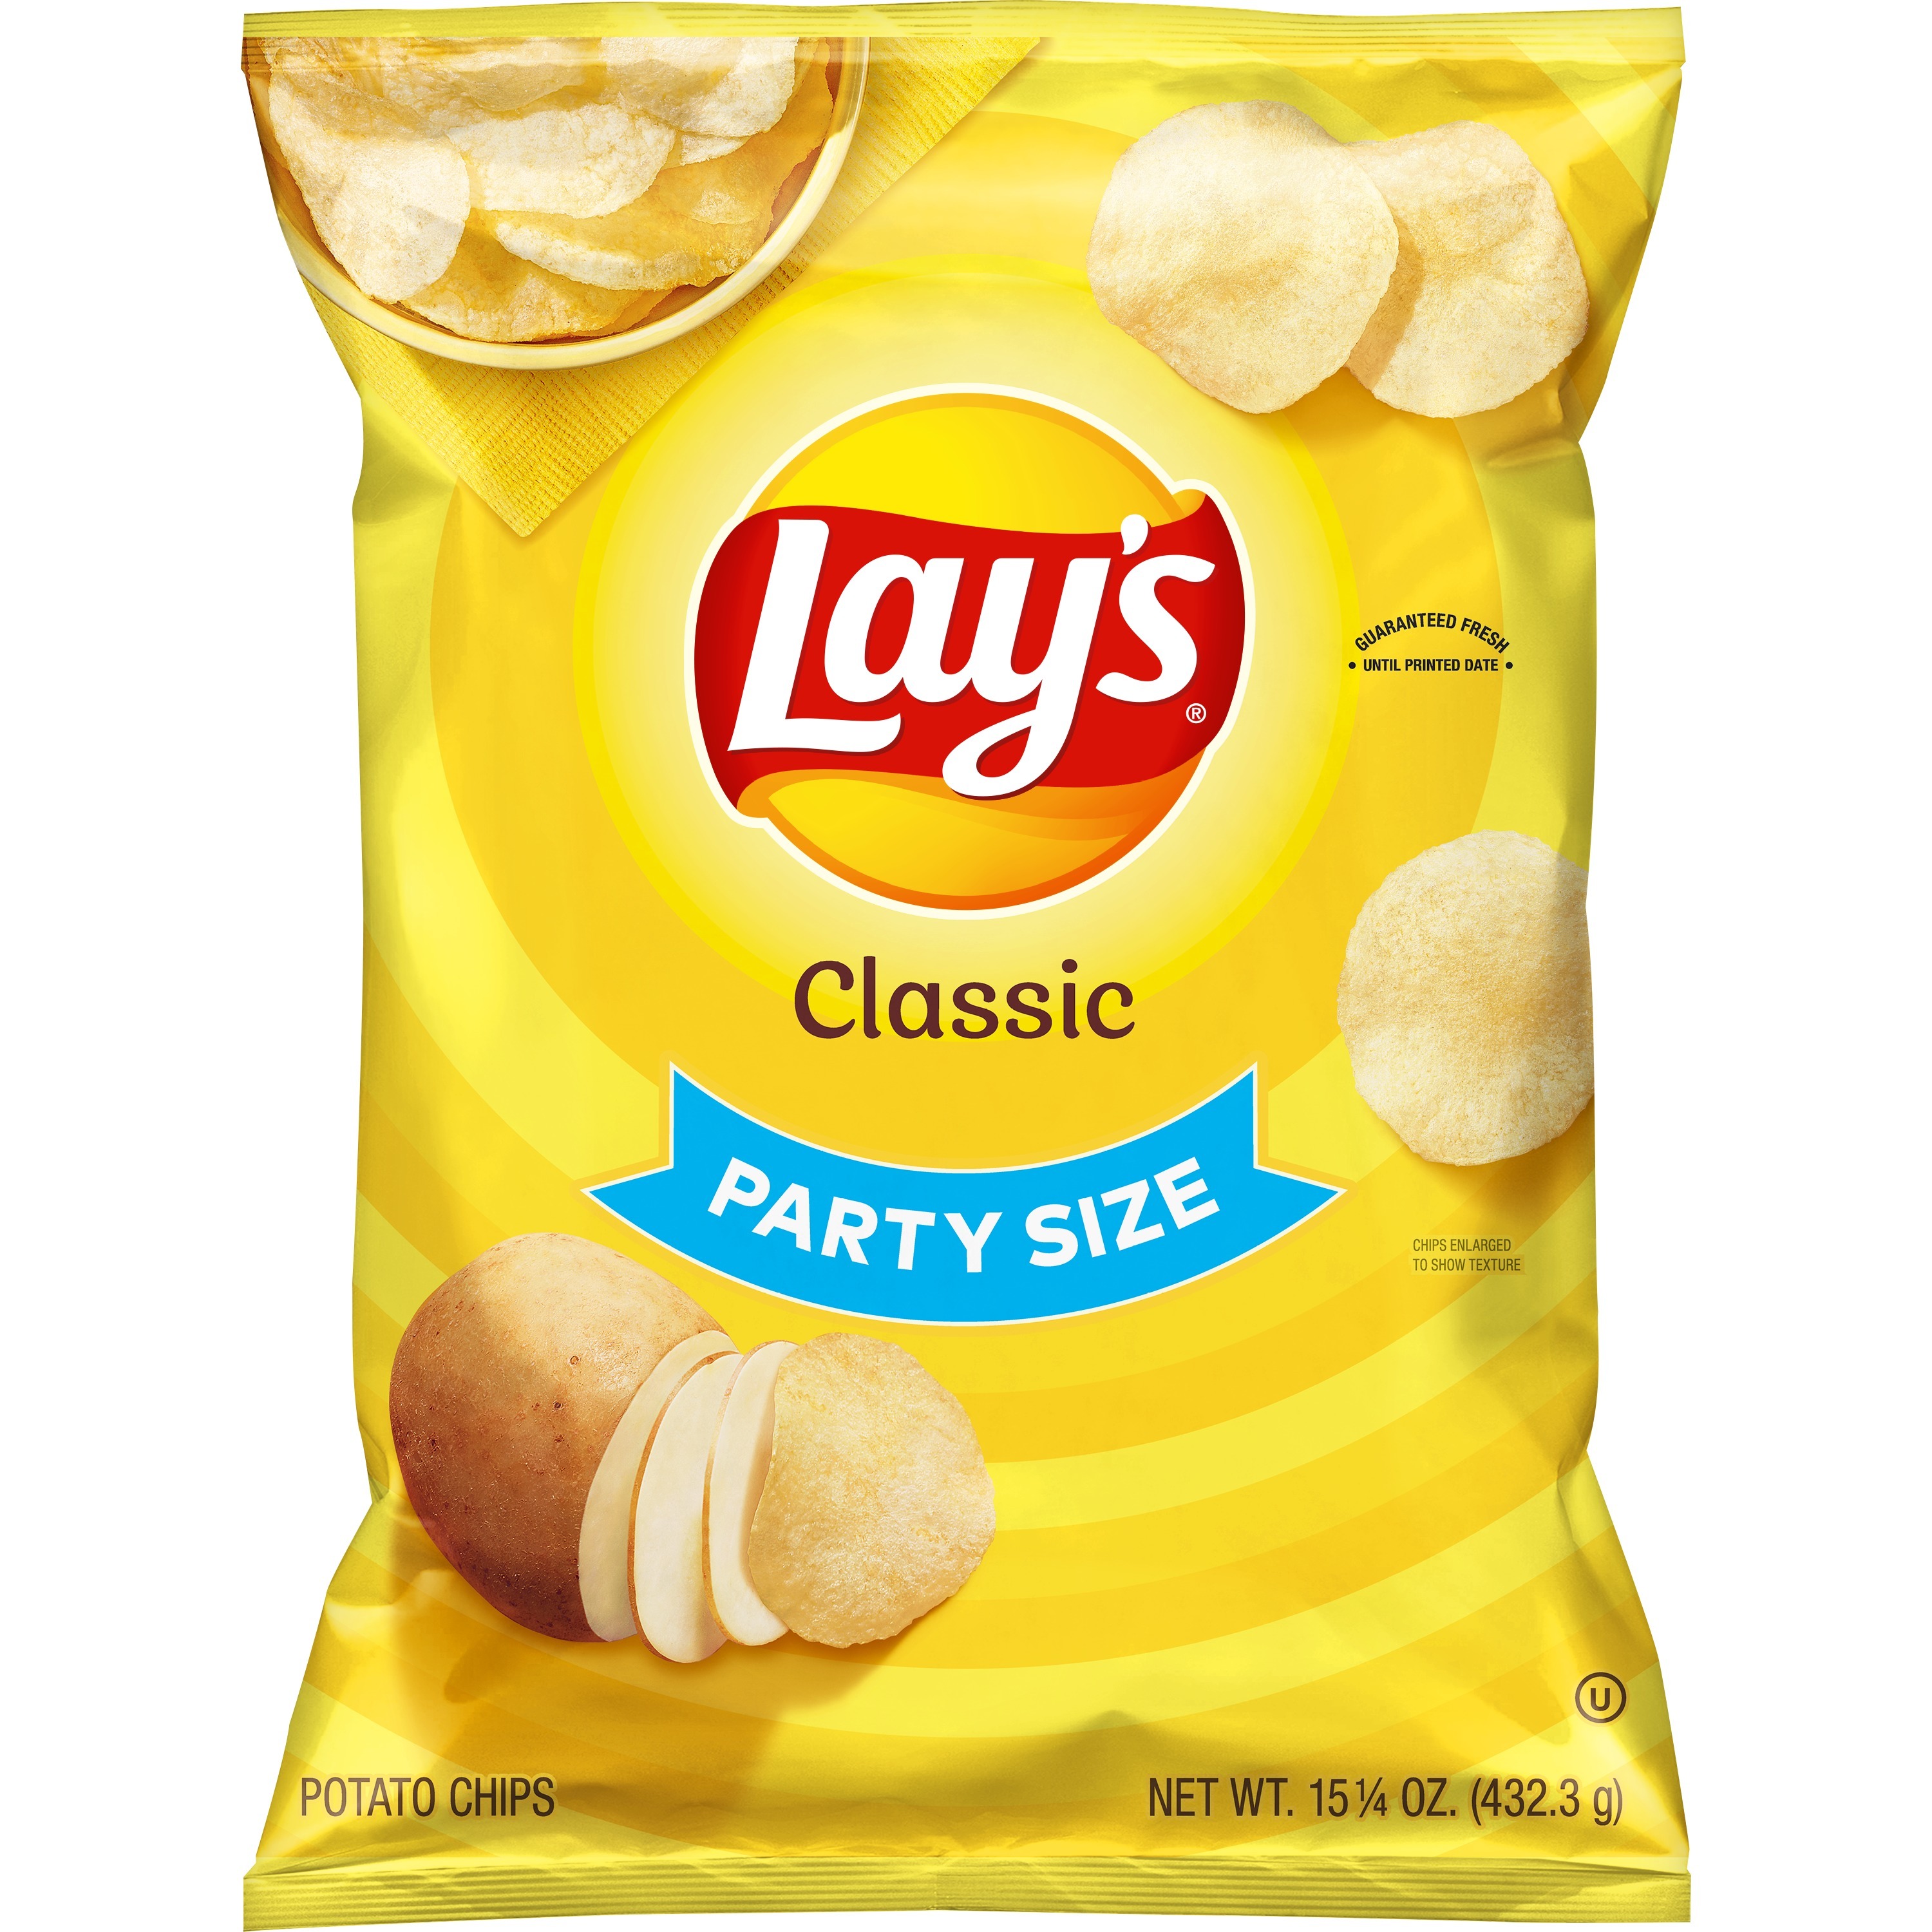 Lay's Potato Chips, Classic, Party Size, 15.25 oz - image 1 of 4